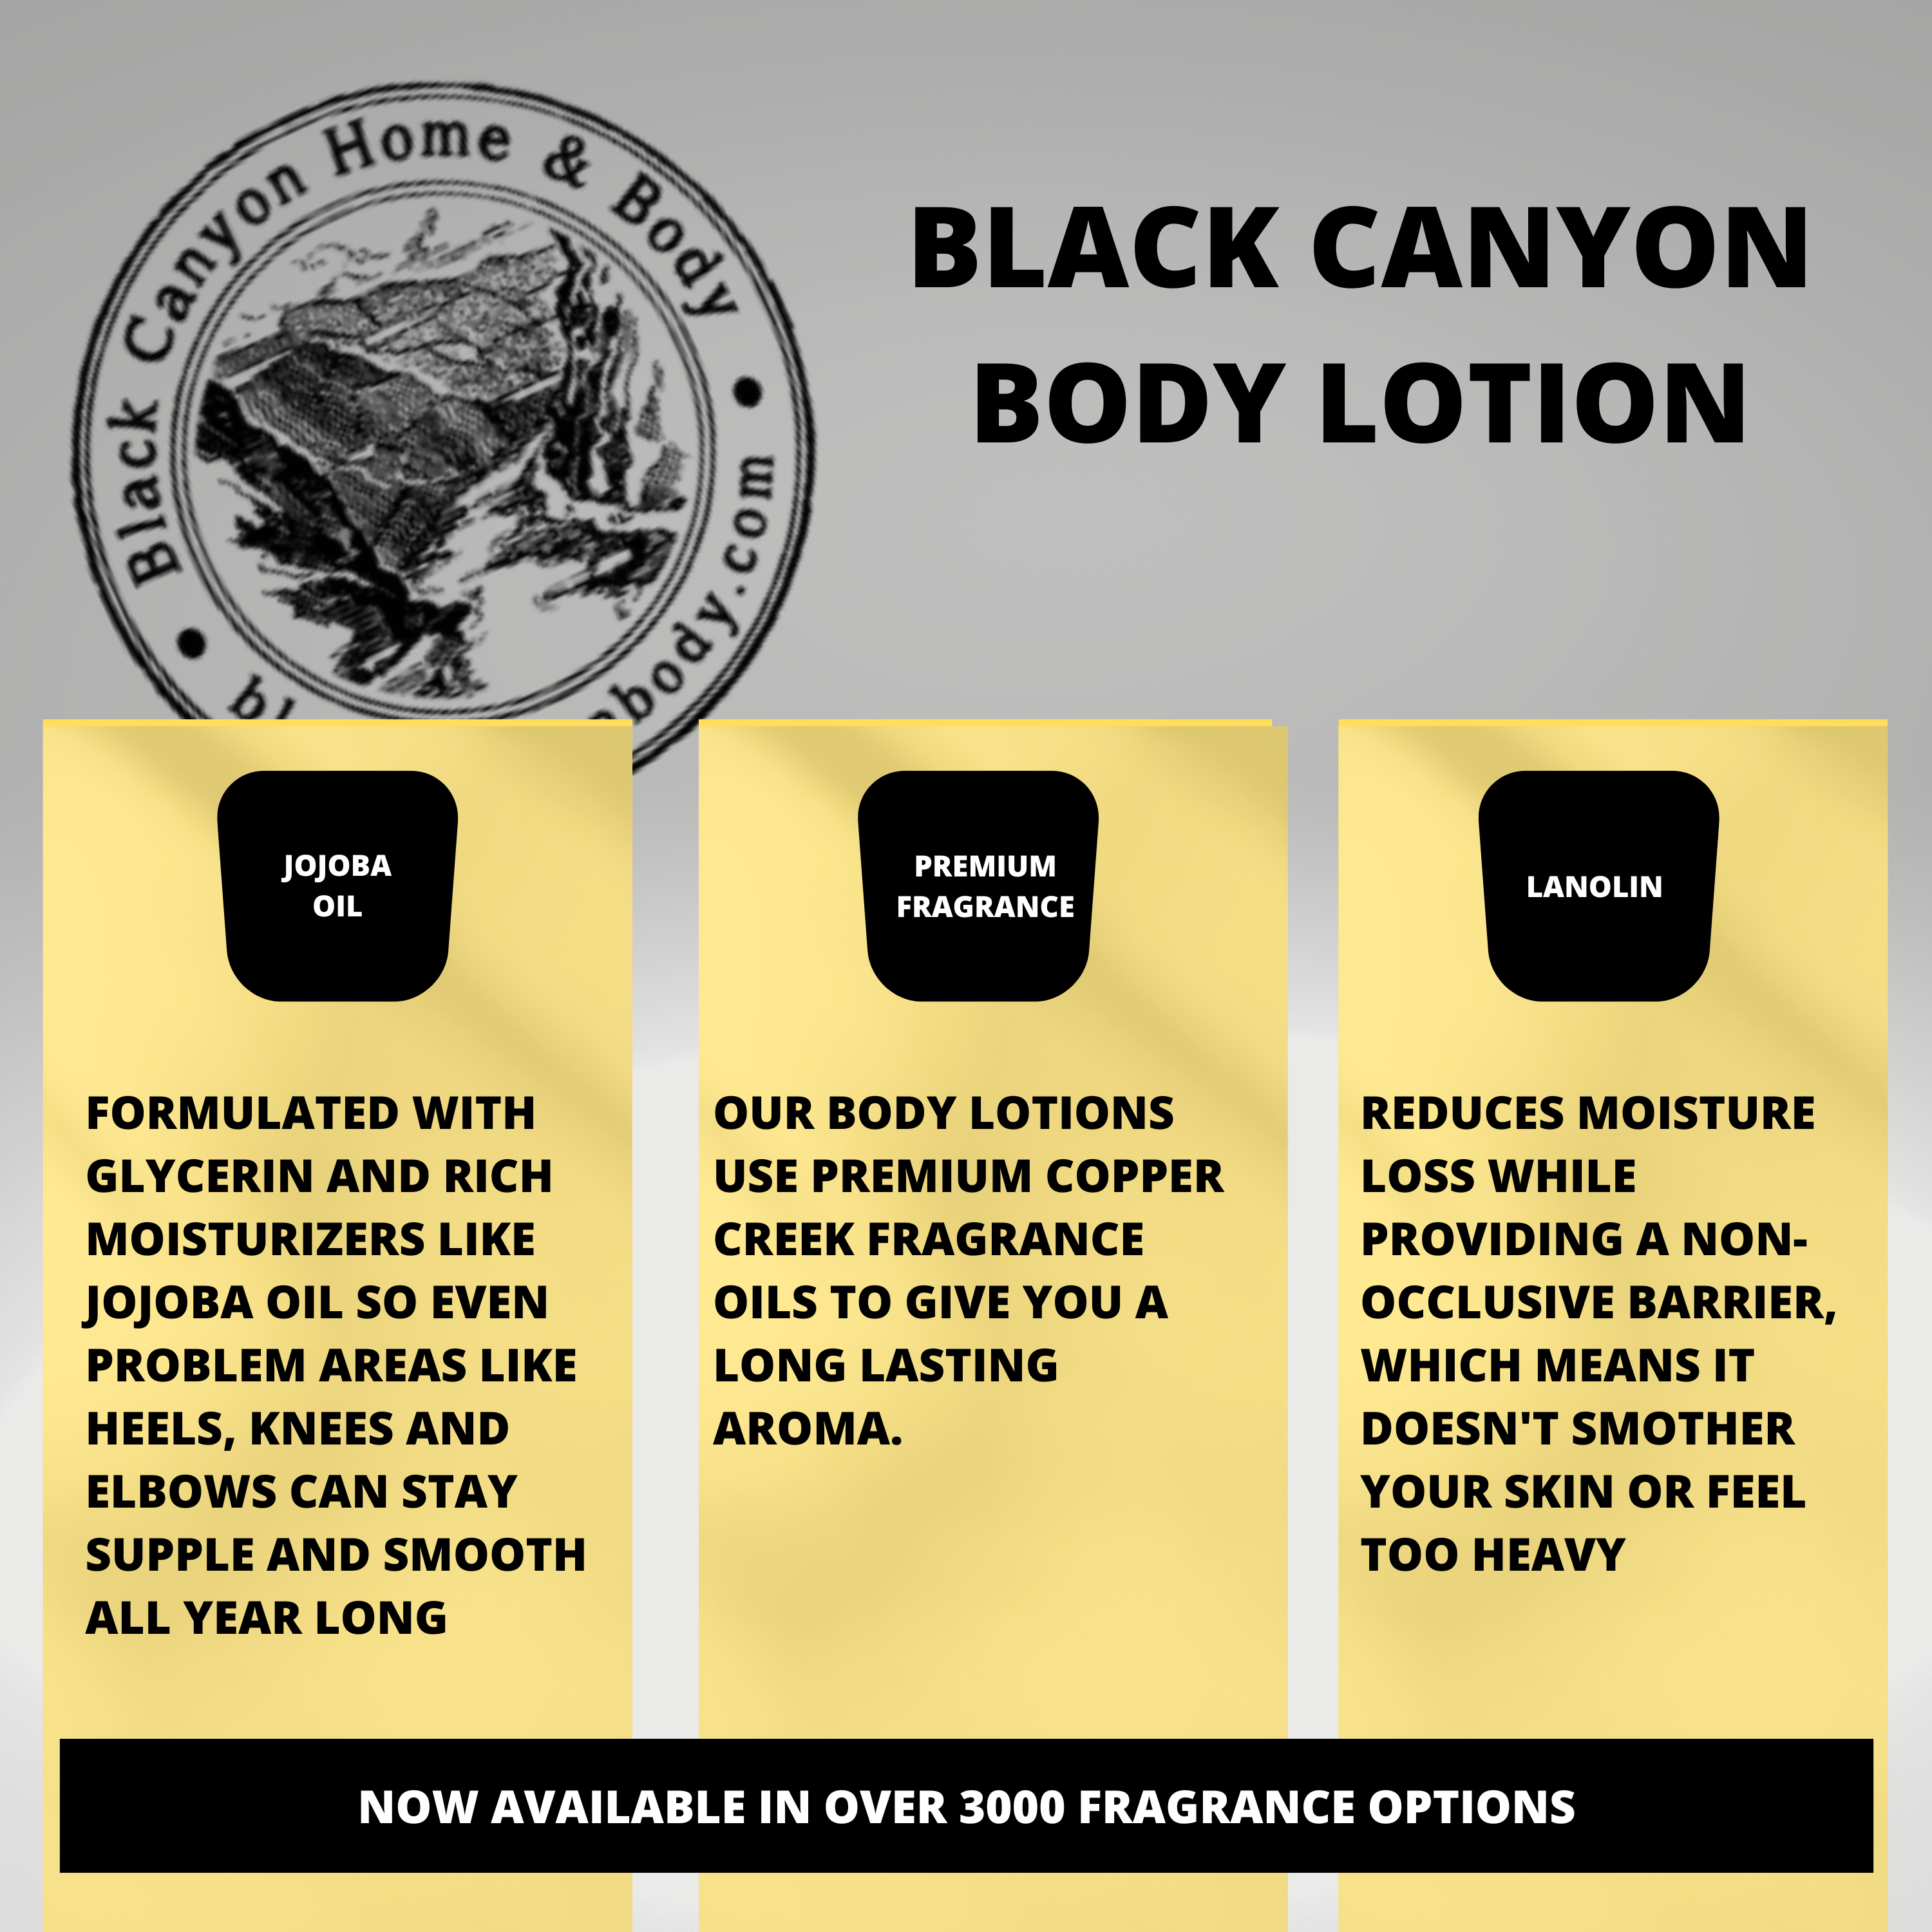 Black Canyon Drunken Pina Colada Scented Luxury Body Lotion with Lanolin and Jojoba Oil